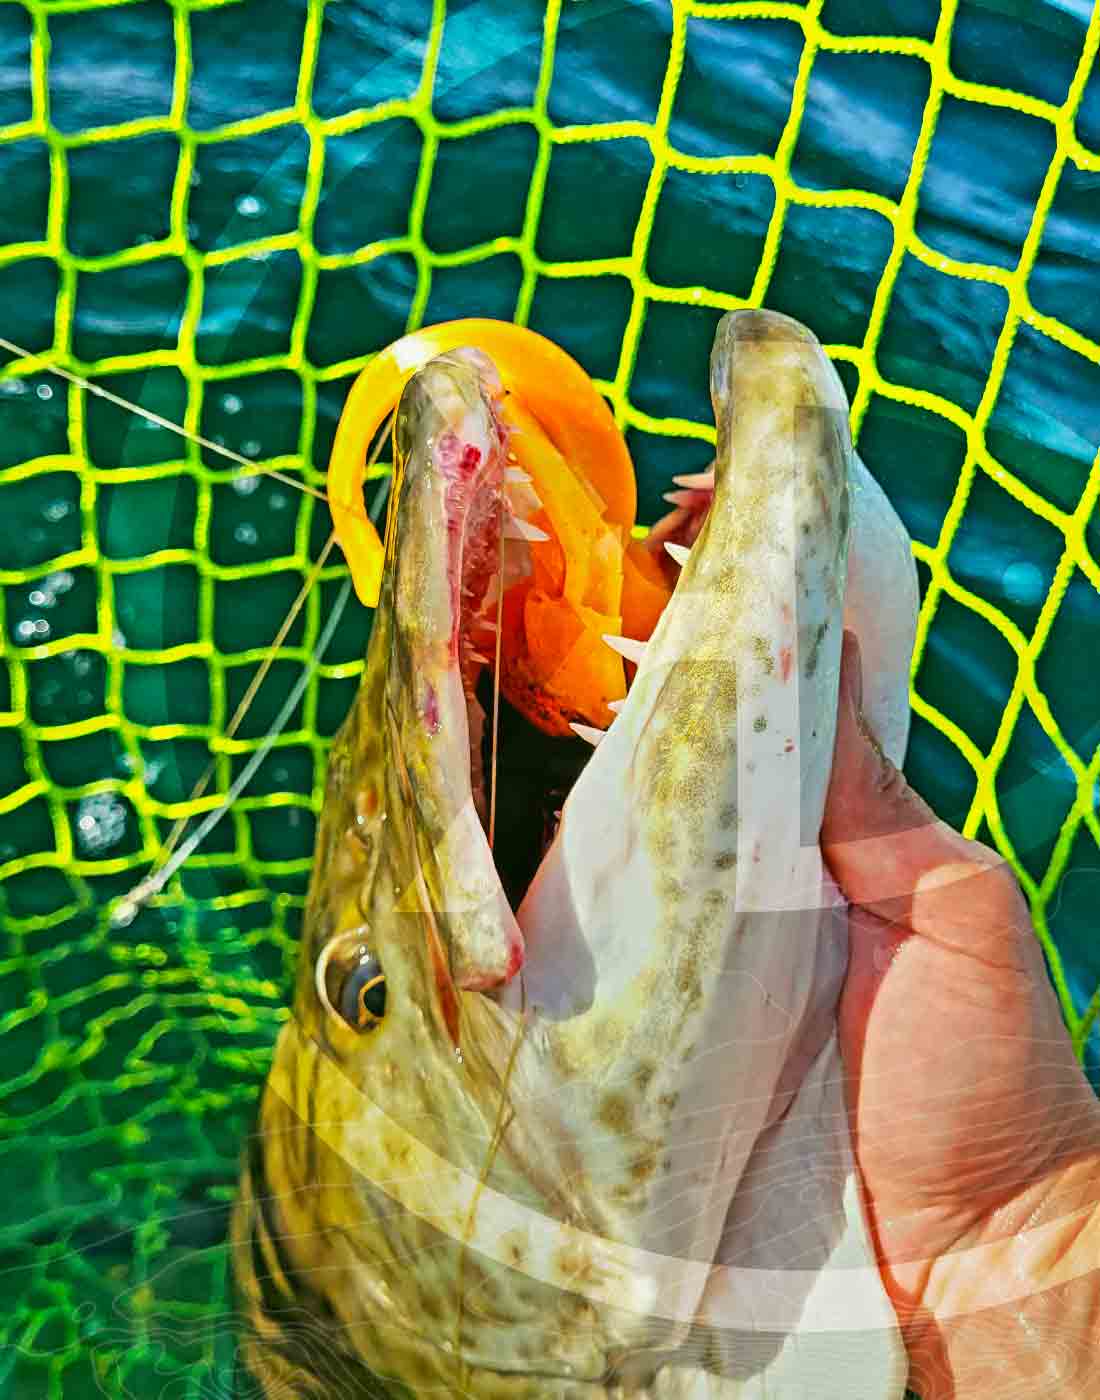 Picture of an angler hand holding a Musky in a RS nets and which has a Medussa lure in the mouth